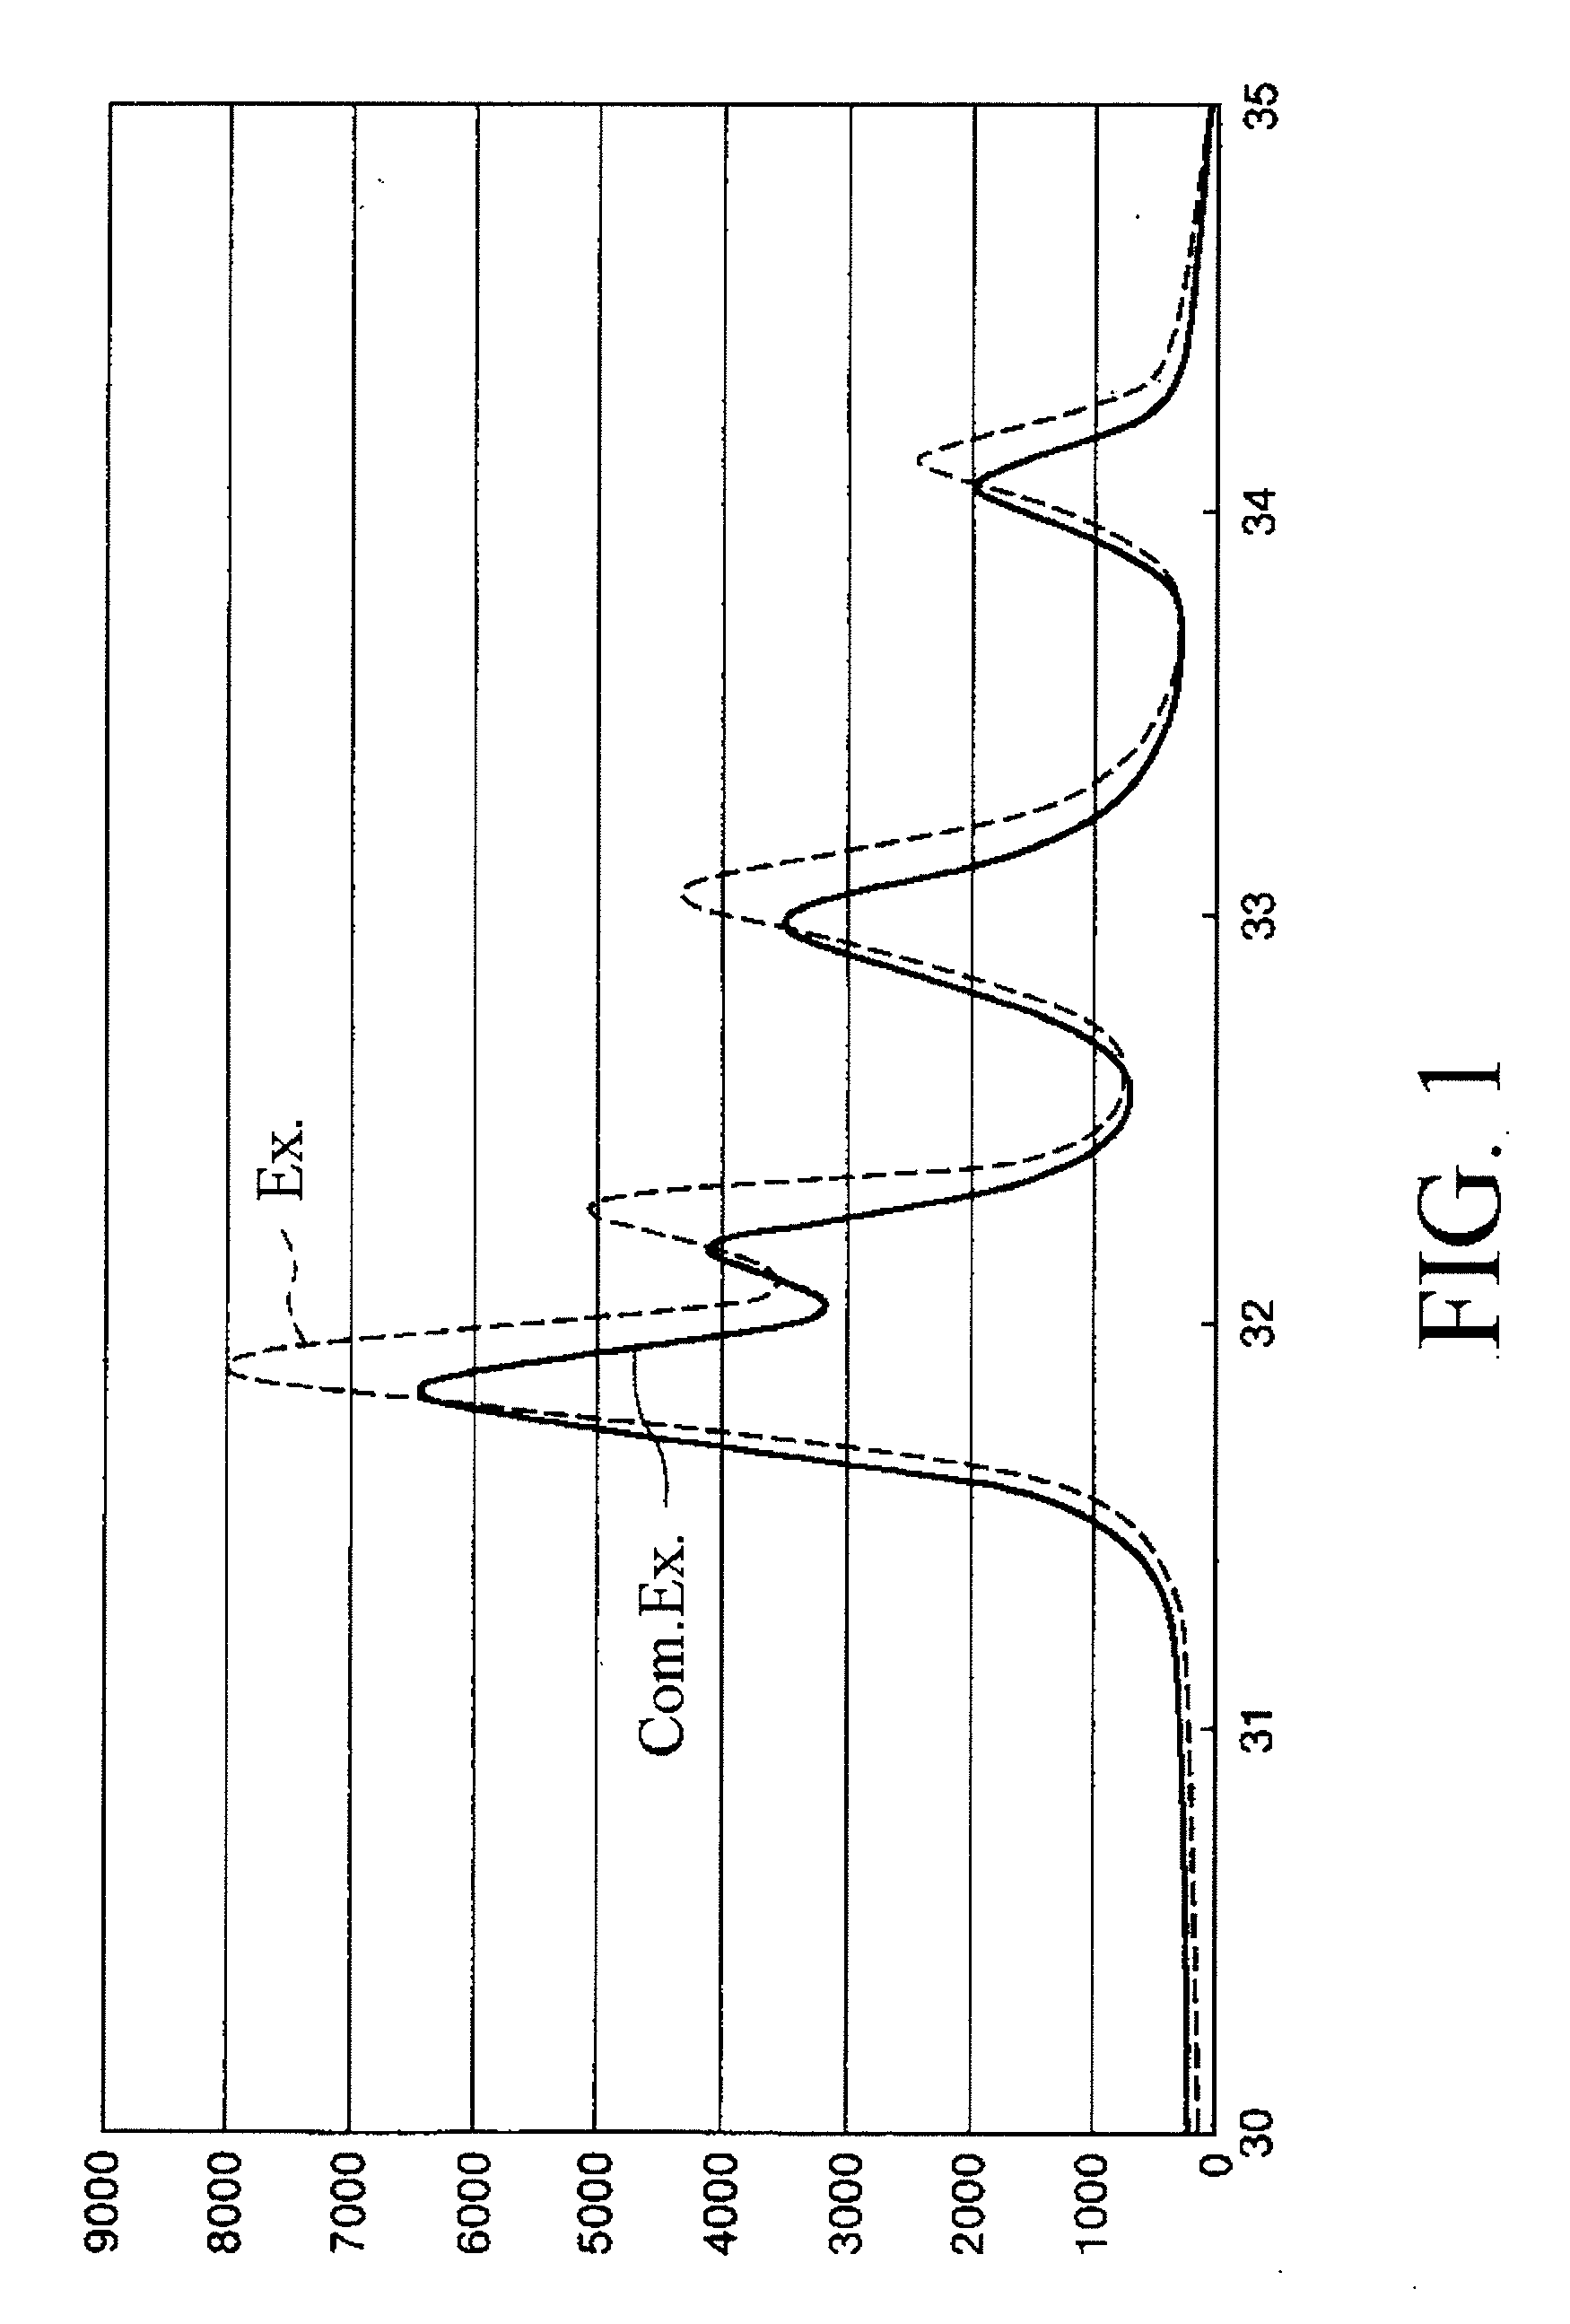 Fluoroapatite dried particles and adsorption apparatus